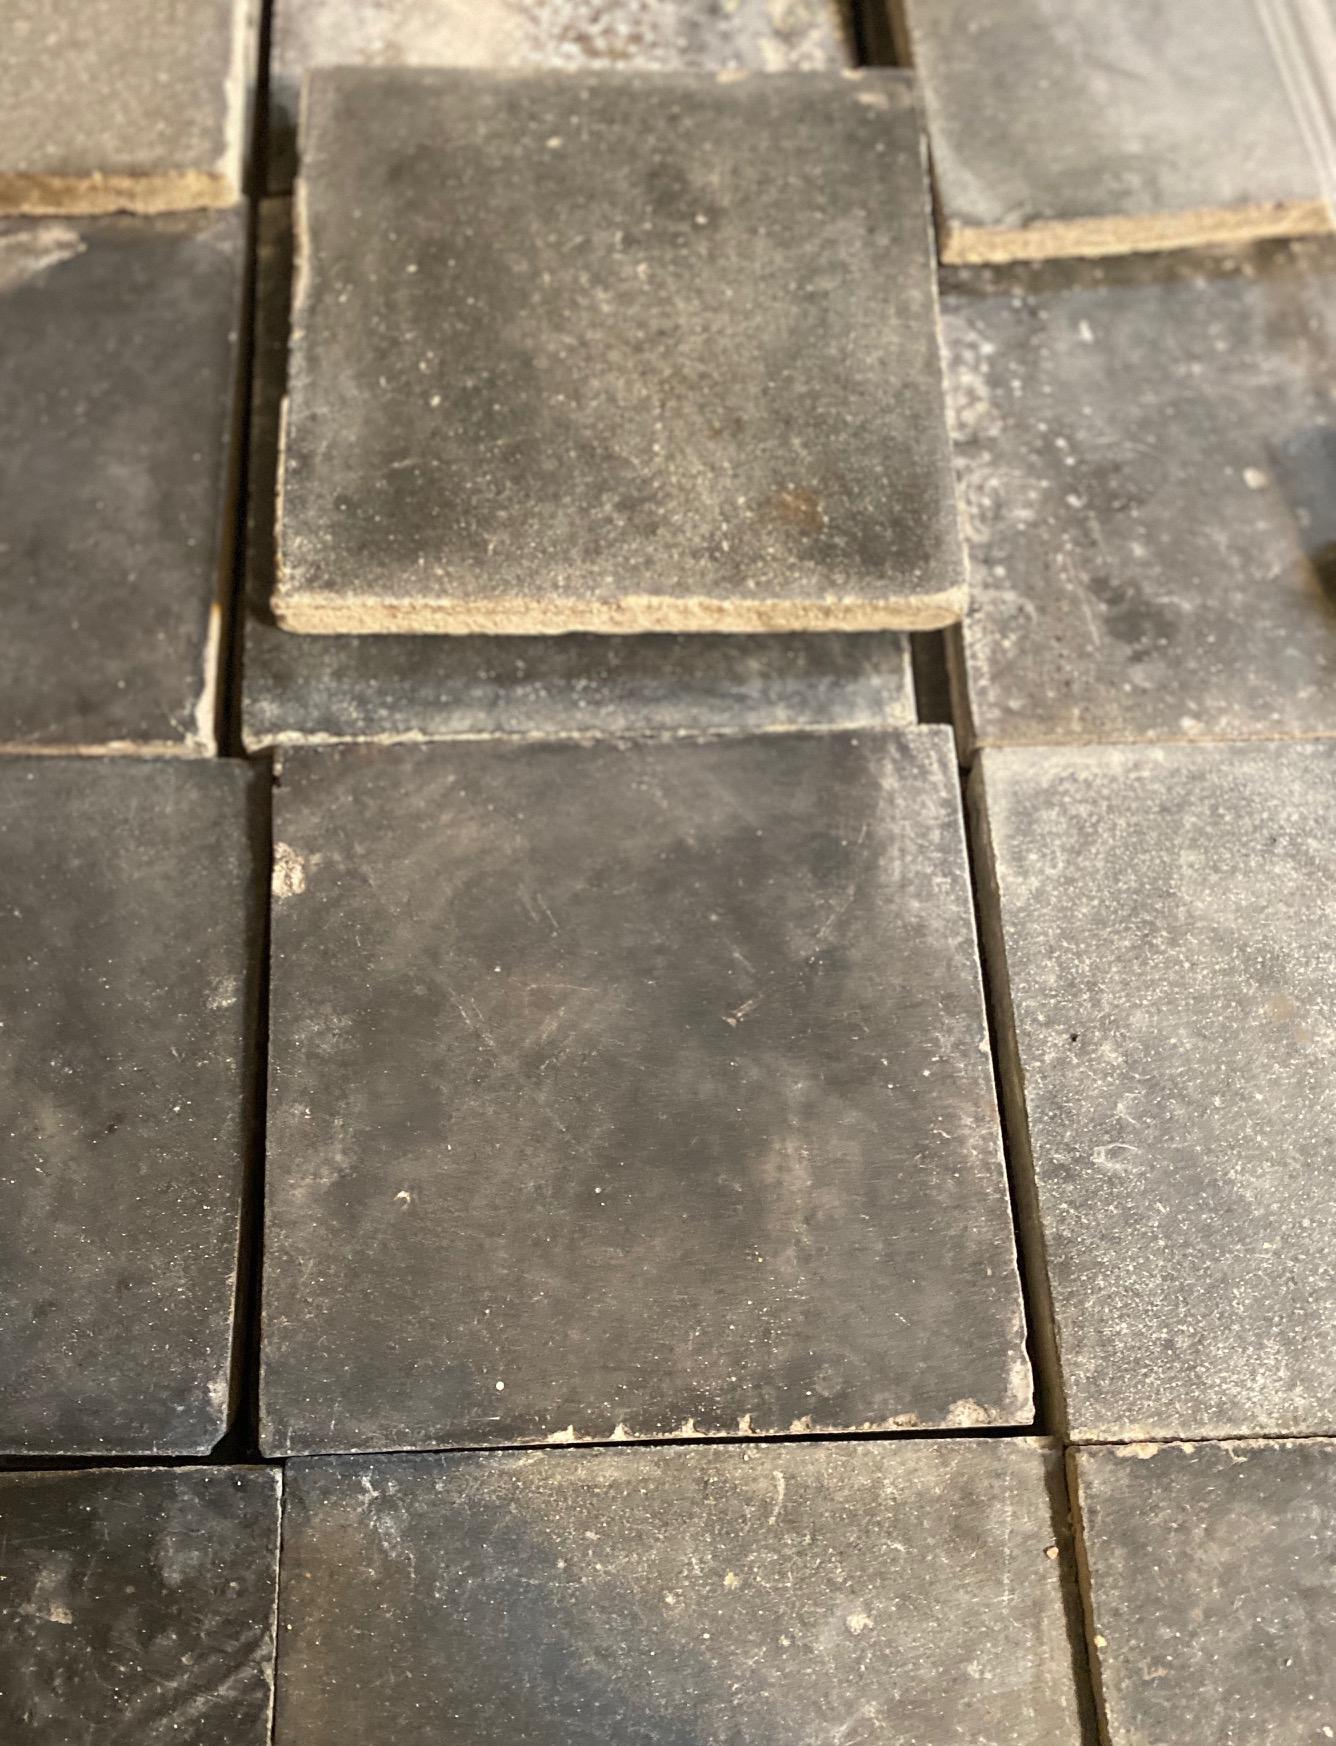 Lot of 700 square feet of reclaimed black tiles from Spain.
Measurements: 8